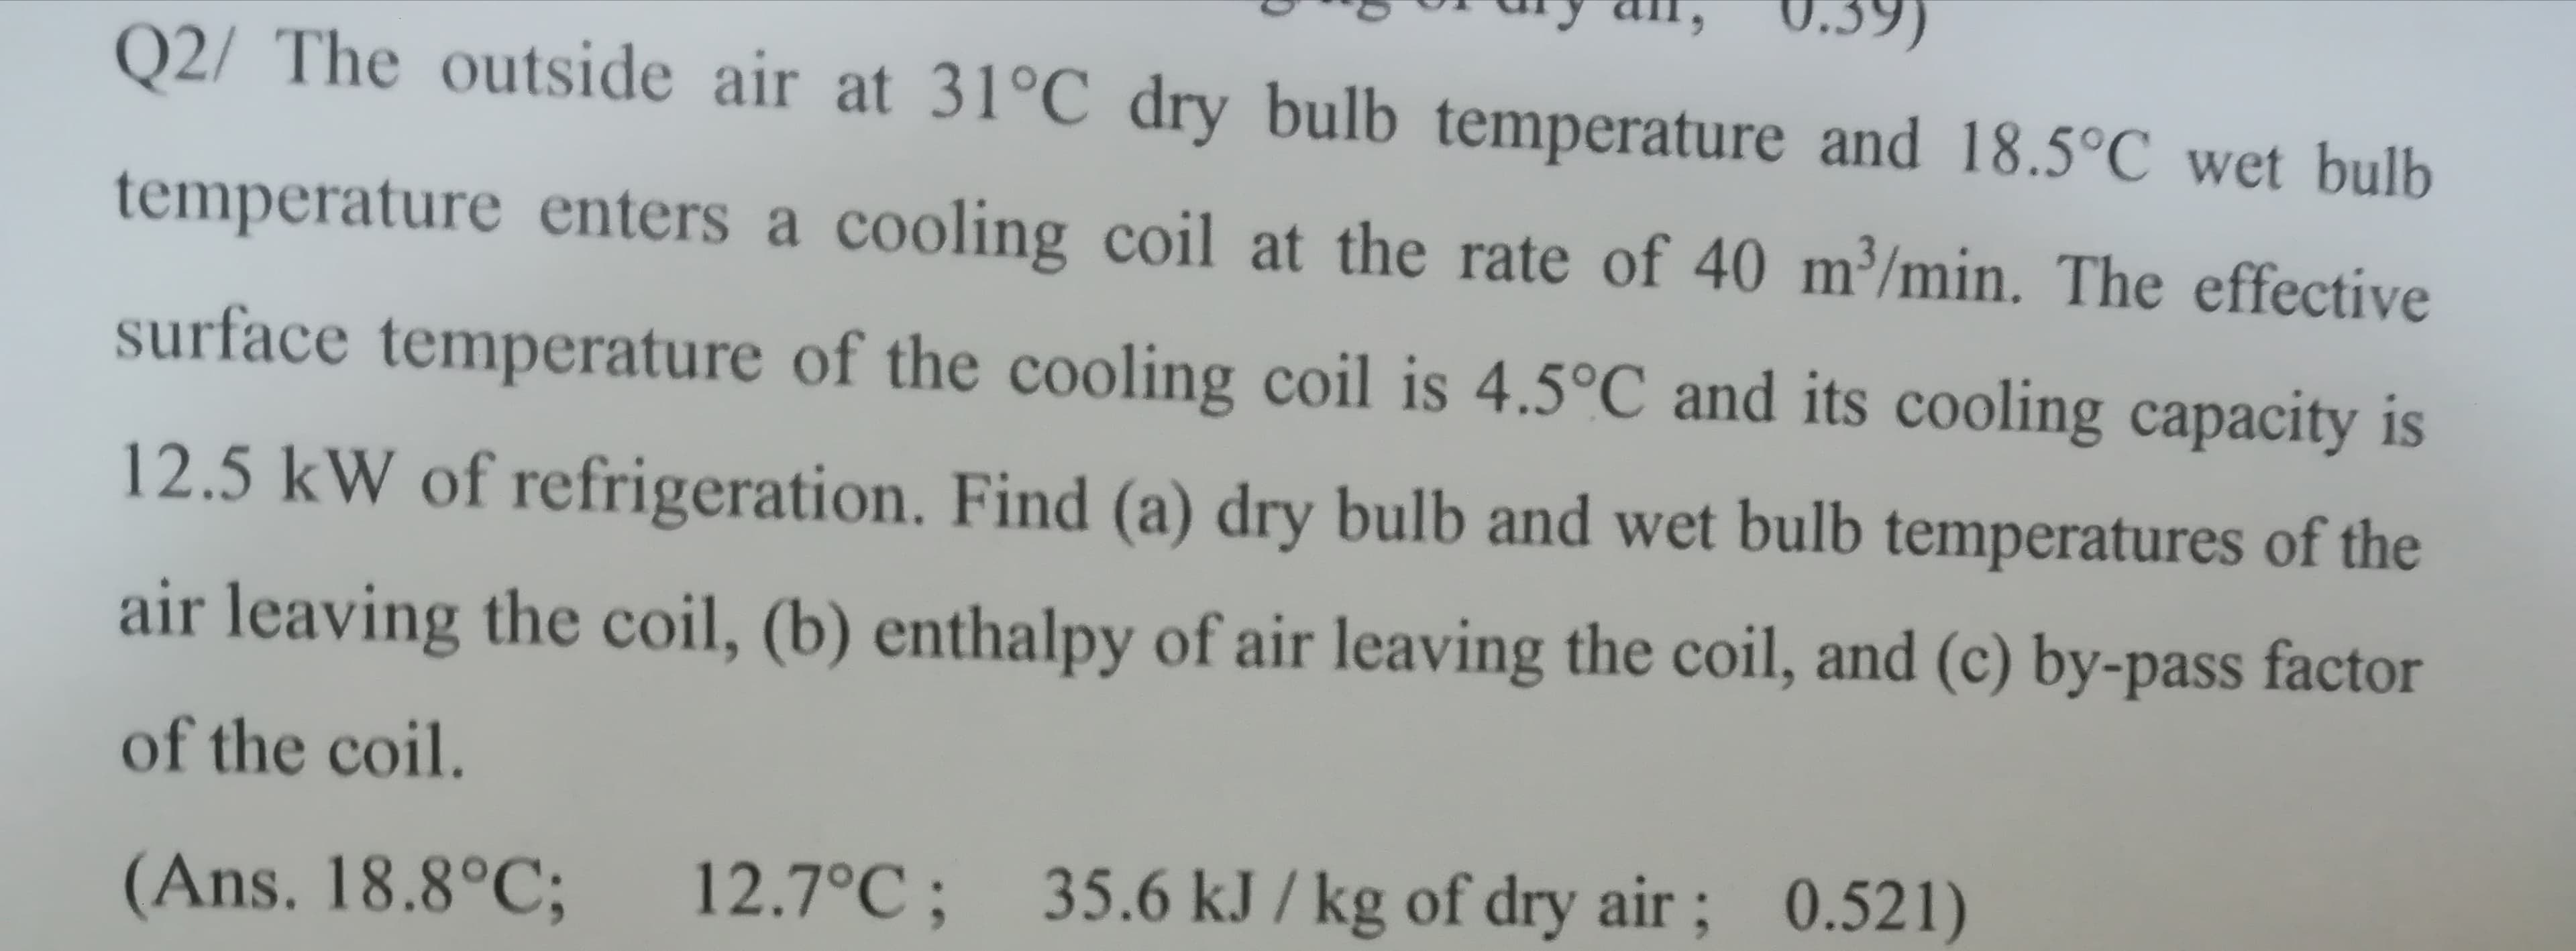 0.39)
Q2/ The outside air at 31°C dry bulb temperature and 18.5°C wet bulb
temperature enters a cooling coil at the rate of 40 m³/min. The effective
surface temperature of the cooling coil is 4.5°C and its cooling capacity is
12.5 kW of refrigeration. Find (a) dry bulb and wet bulb temperatures of the
air leaving the coil, (b) enthalpy of air leaving the coil, and (c) by-pass factor
of the coil.
